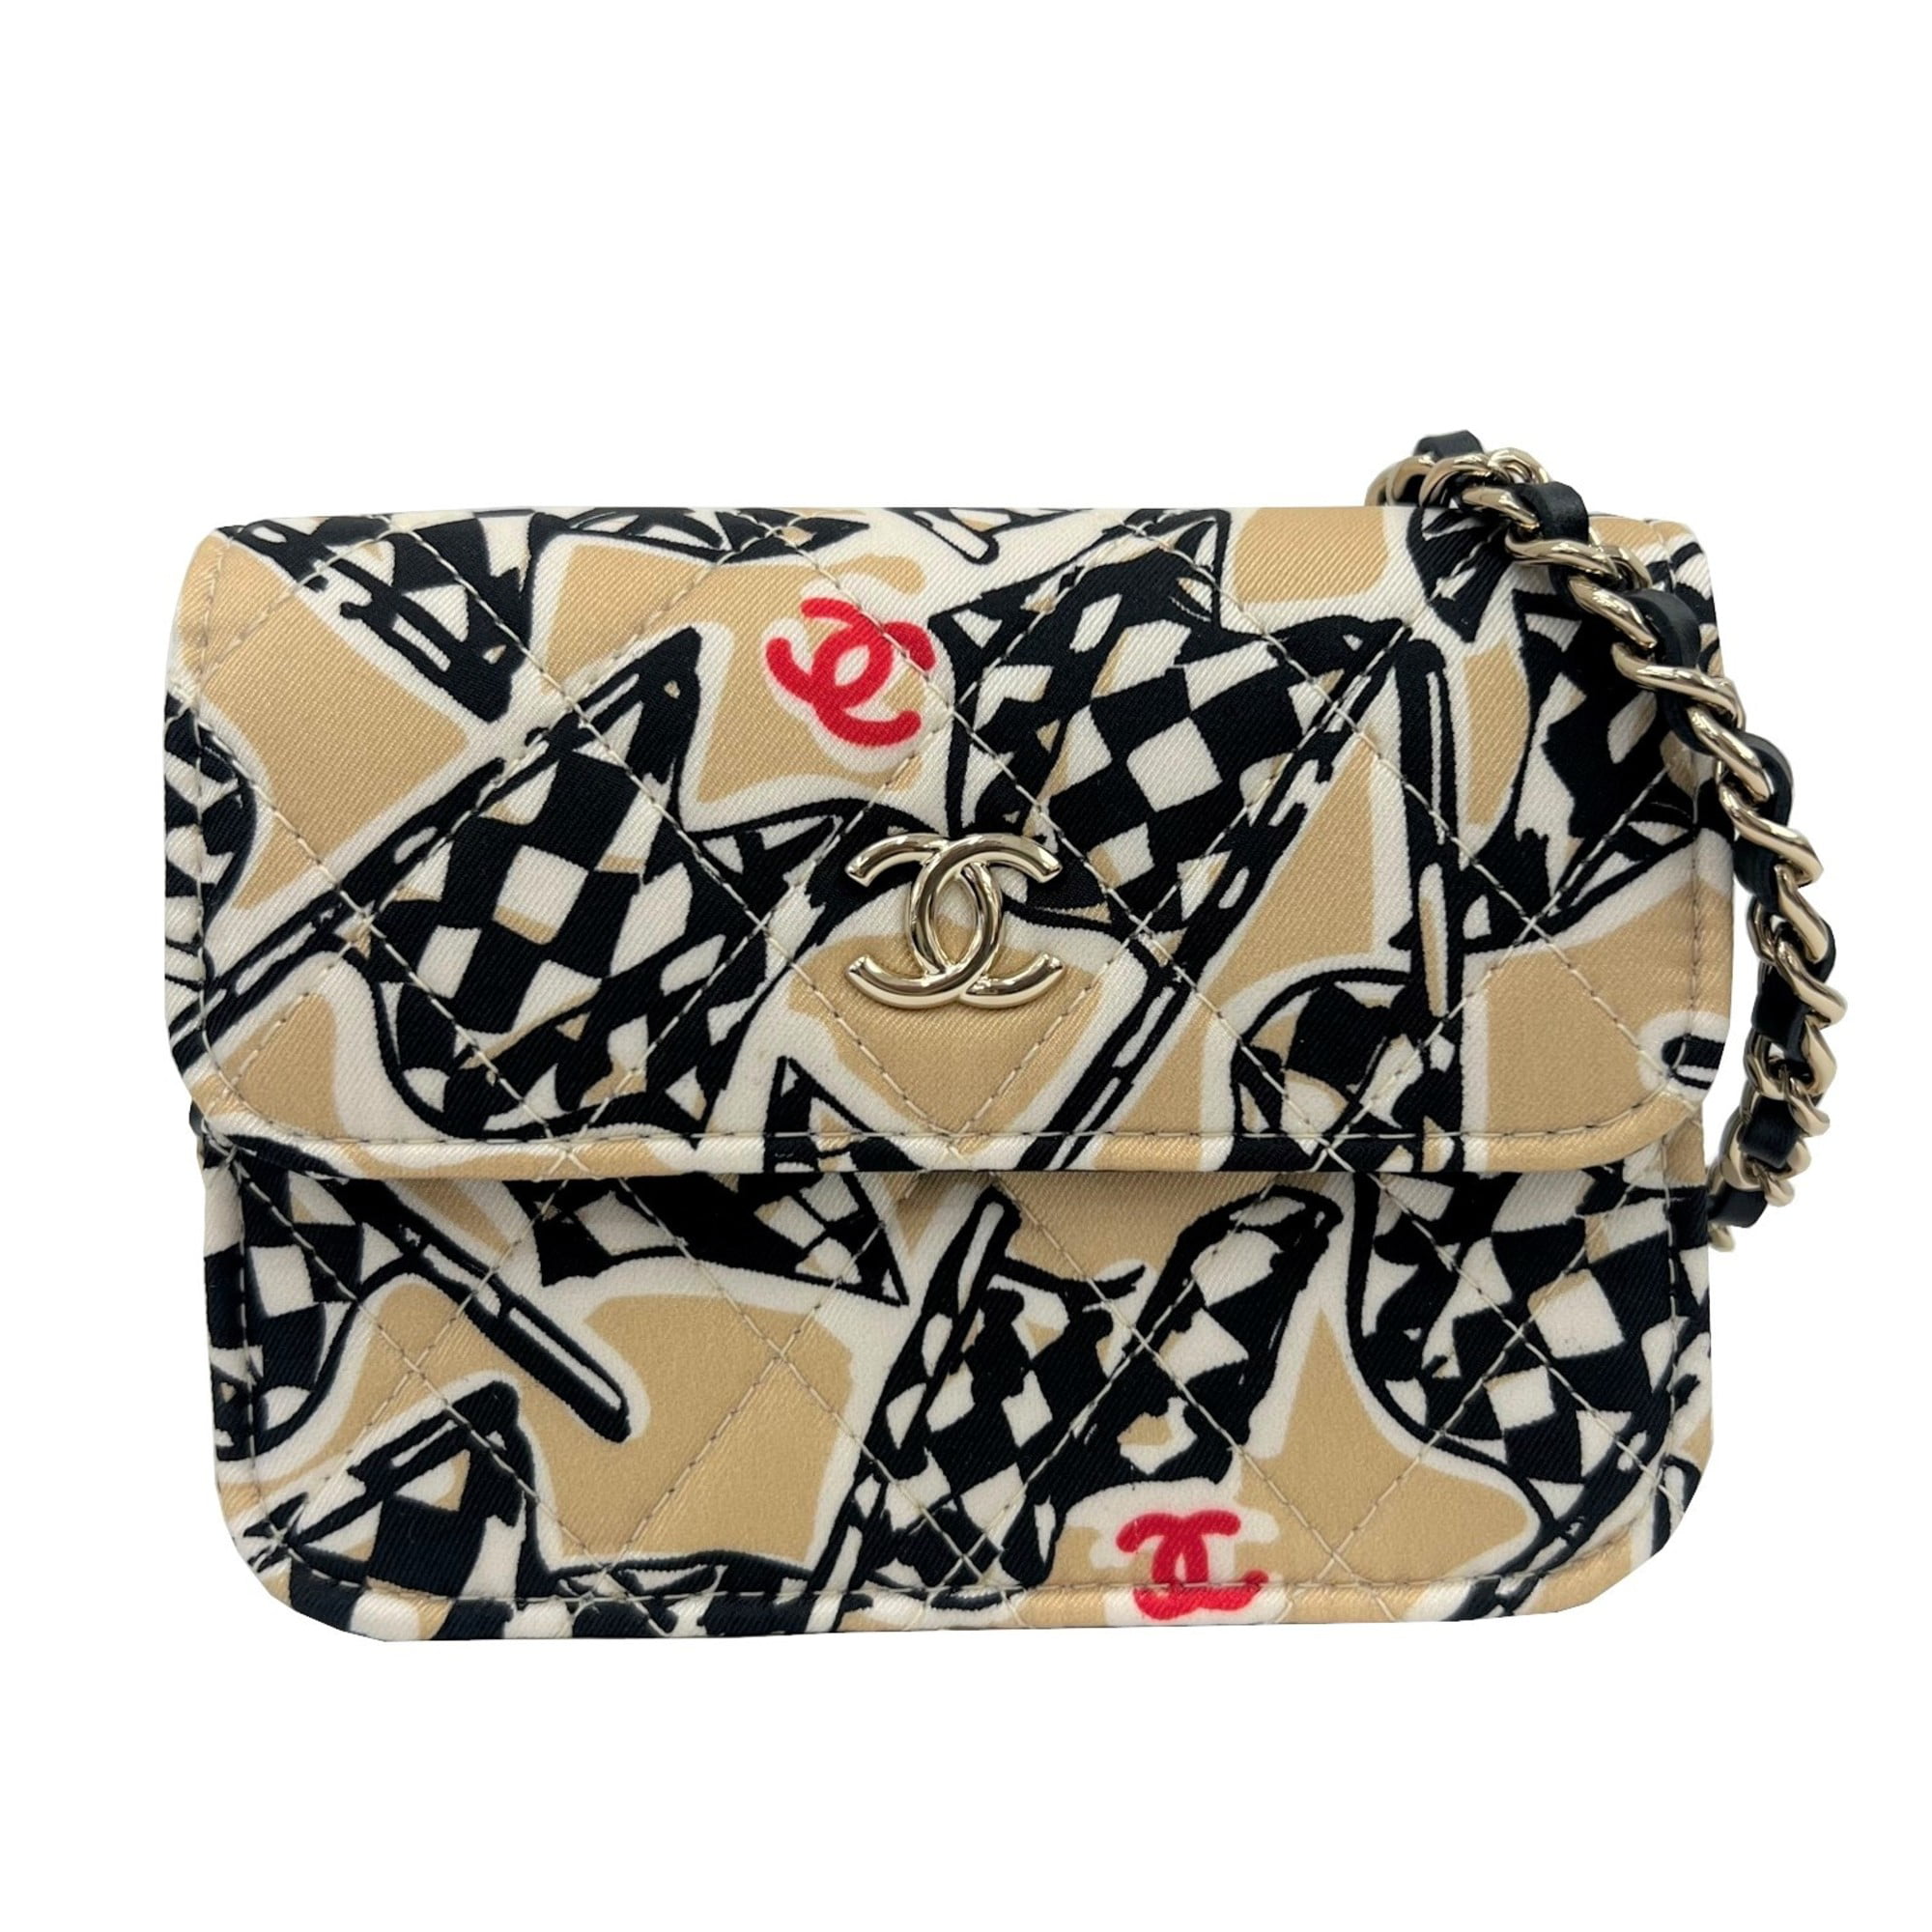 Authenticated Used Chanel CHANEL Earend Checkered Flag Print